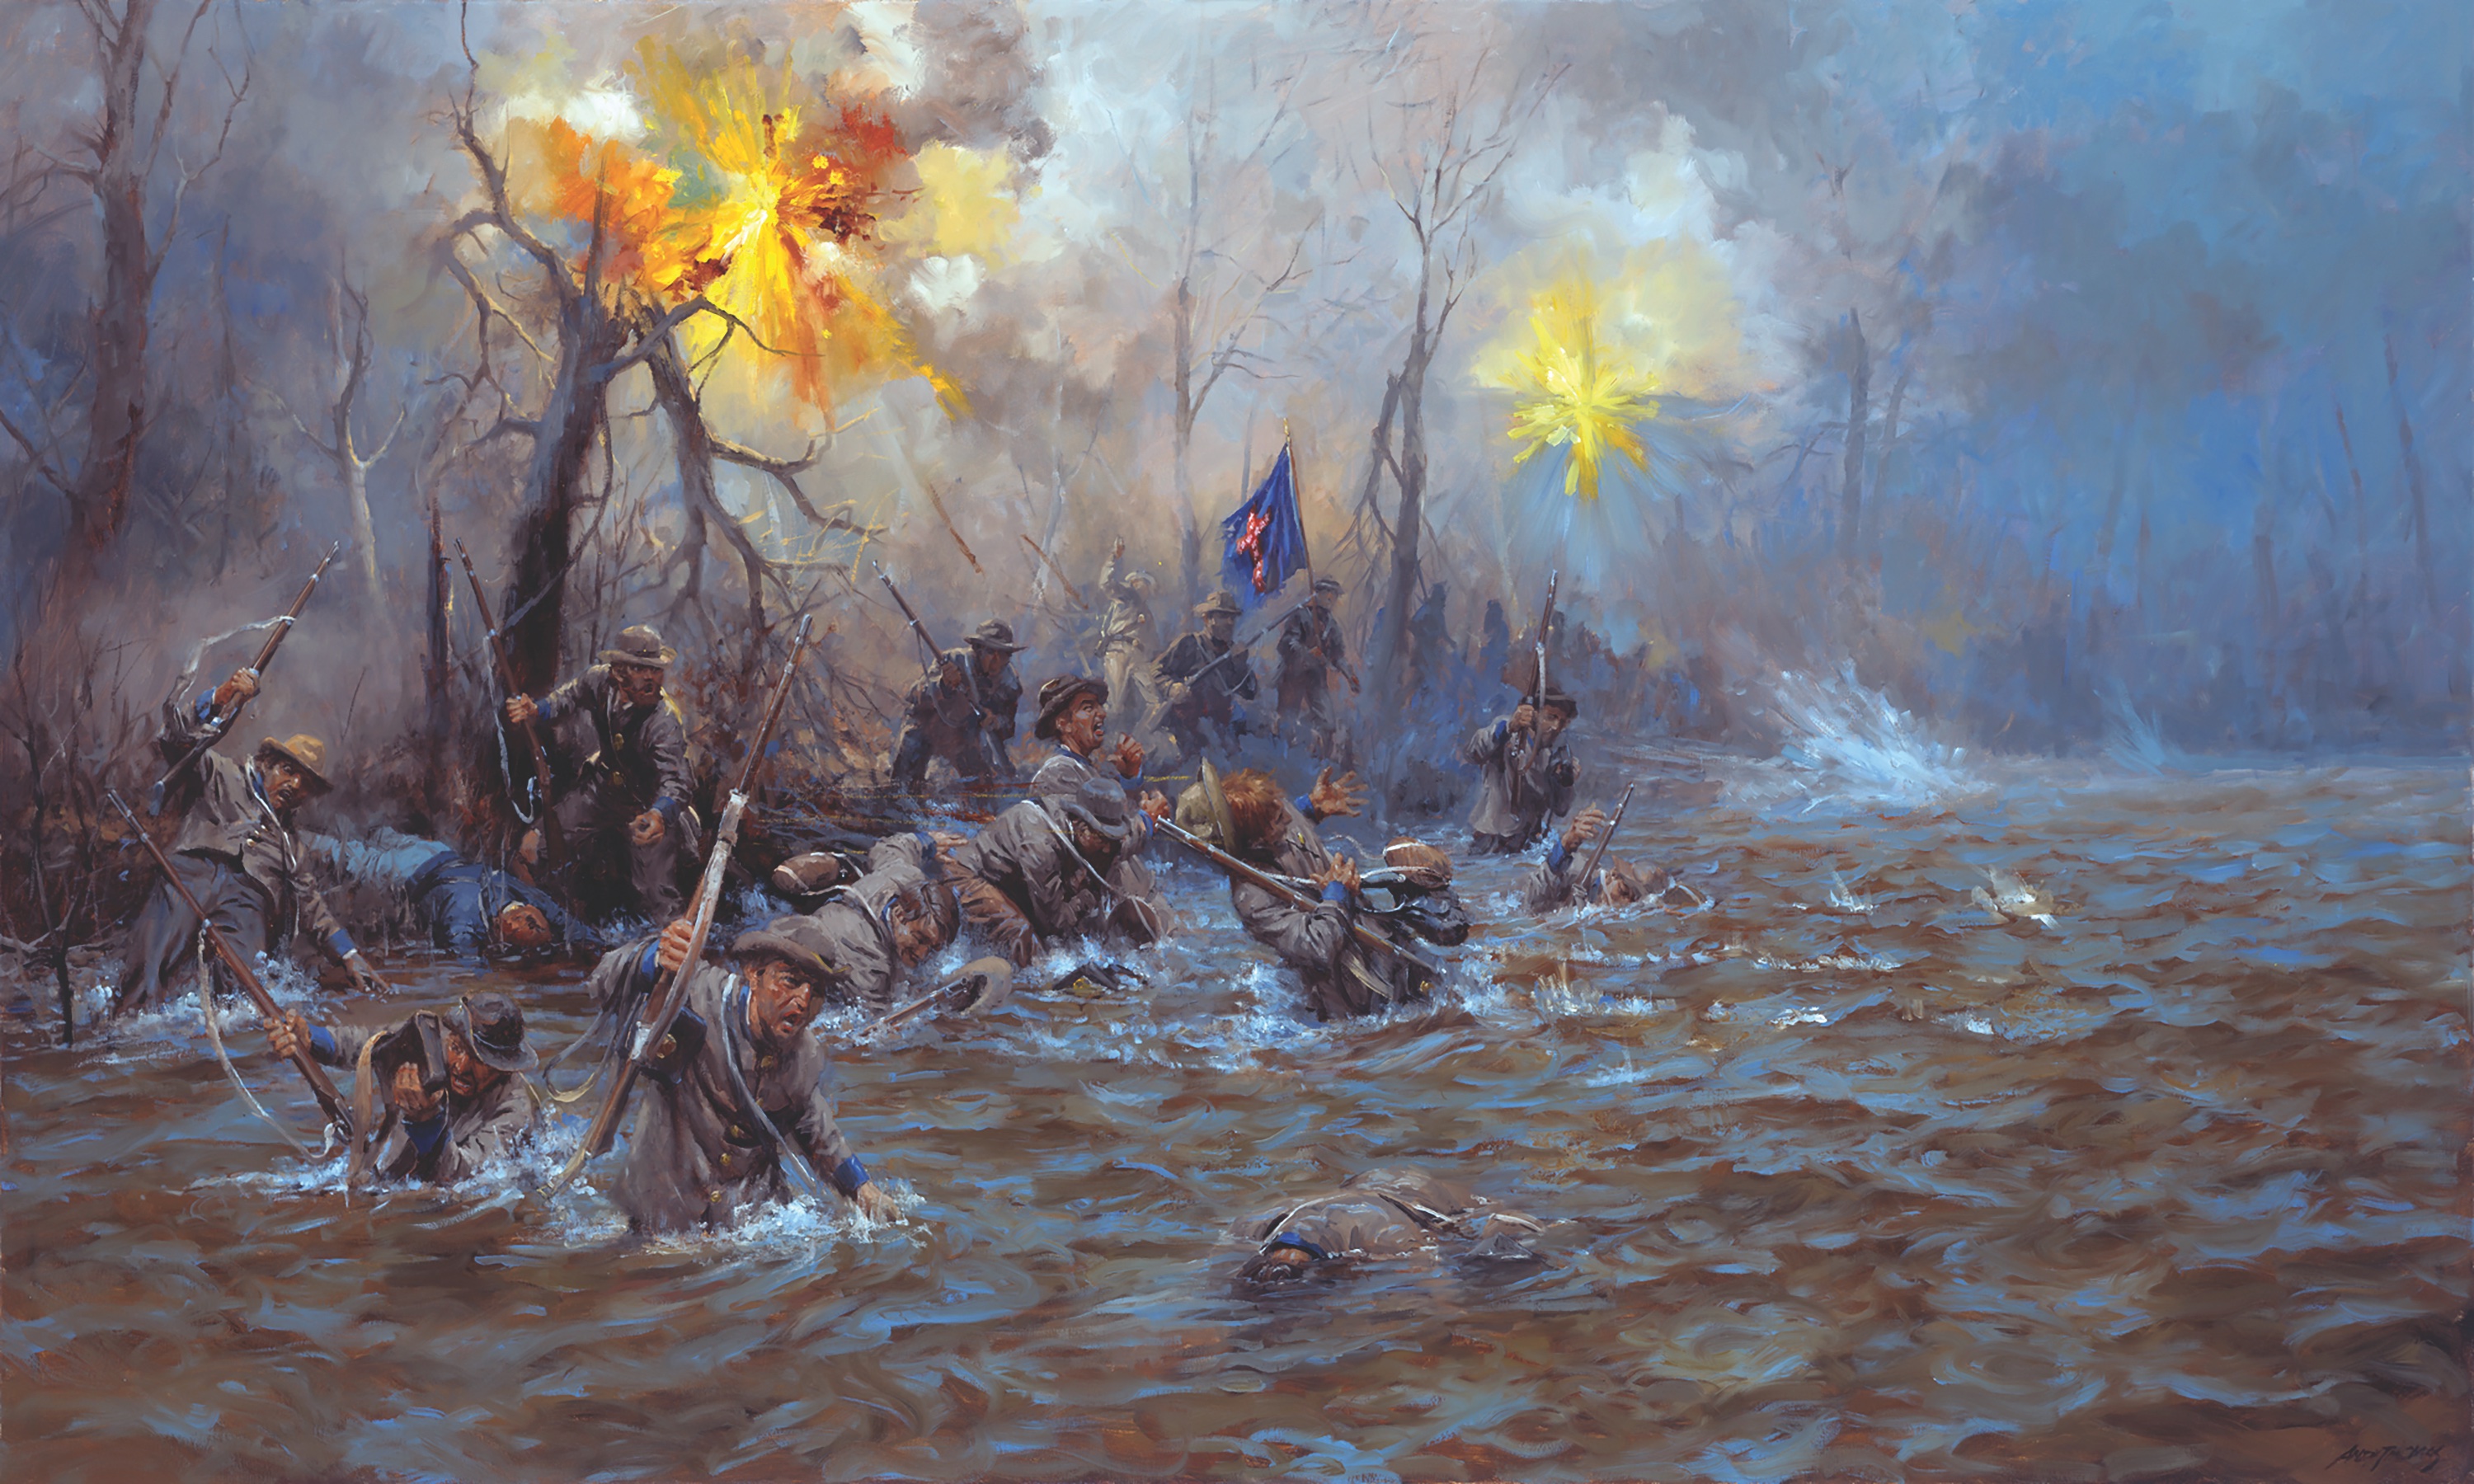 This painting shows soldiers of the Kentucky Orphan Brigade struggling to cross Stones River. The brigade suffered 430 casualties out of 1,200 men on January 2. “My poor Orphan Brigade! They have cut it to pieces!” lamented Breckinridge. (© ”My Poor Orphans" by Andy Thomas)